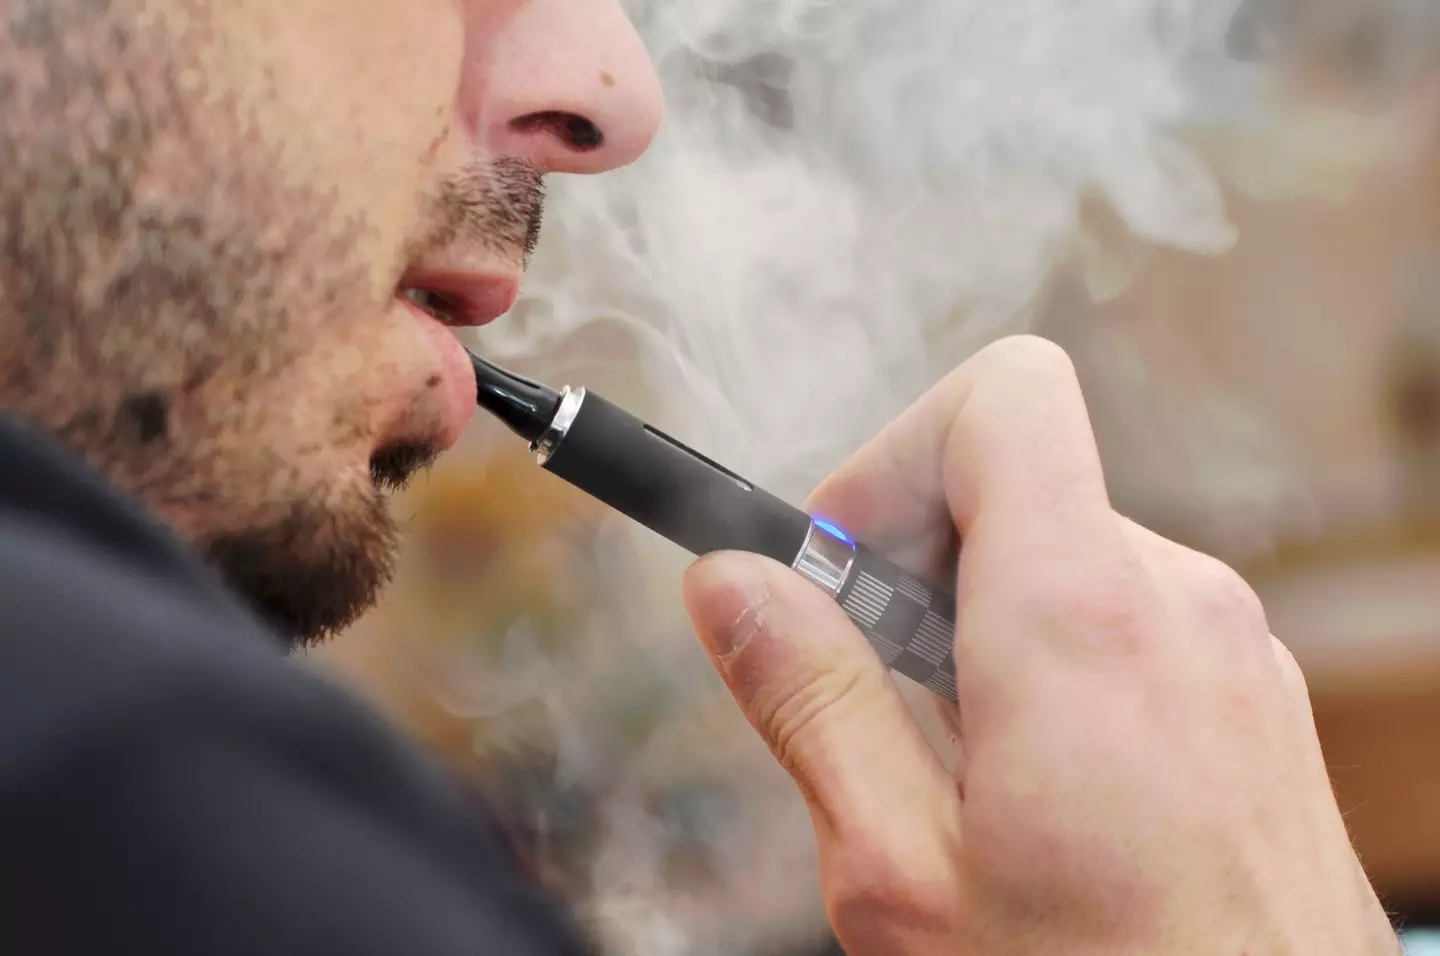 UK ministers are getting ready to ban disposable vapes, making them illegal on health and environmental grounds as of next week.